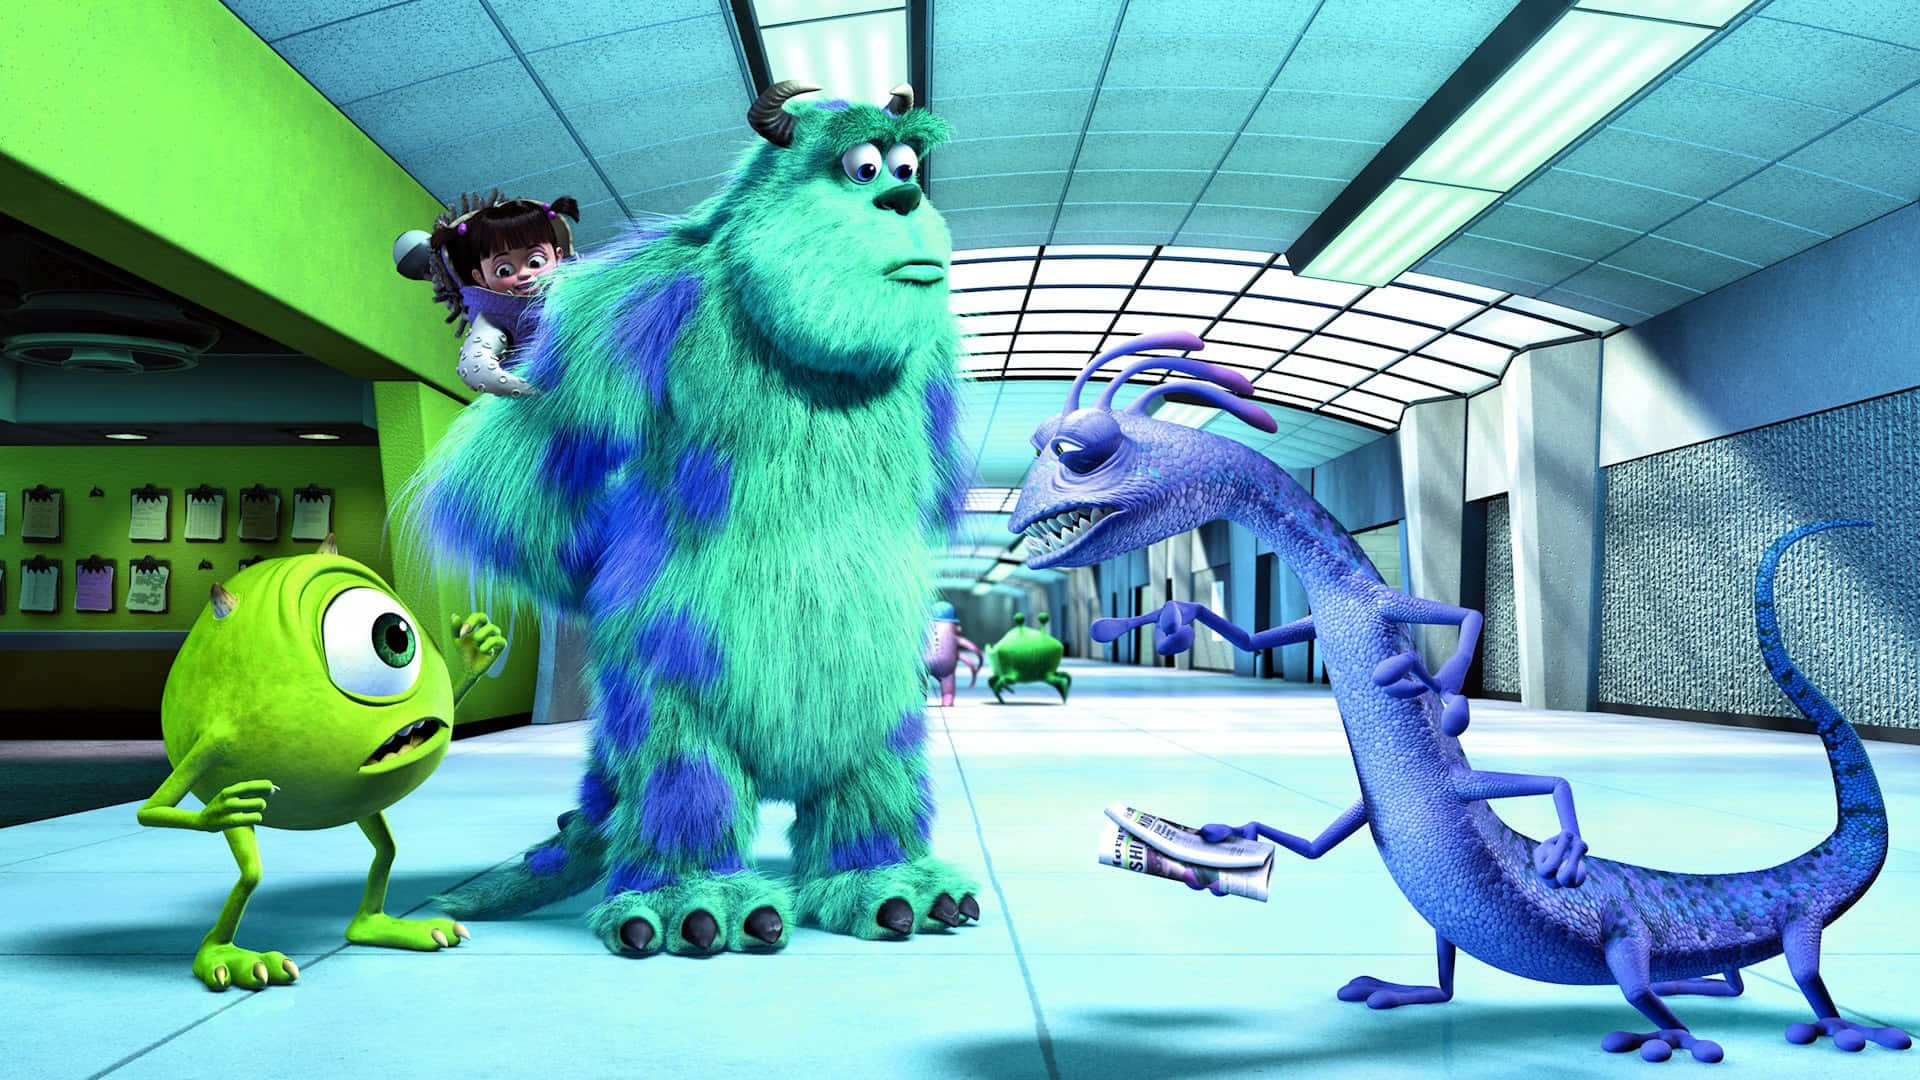 Sulley and Mike prepare for another day of scaring!